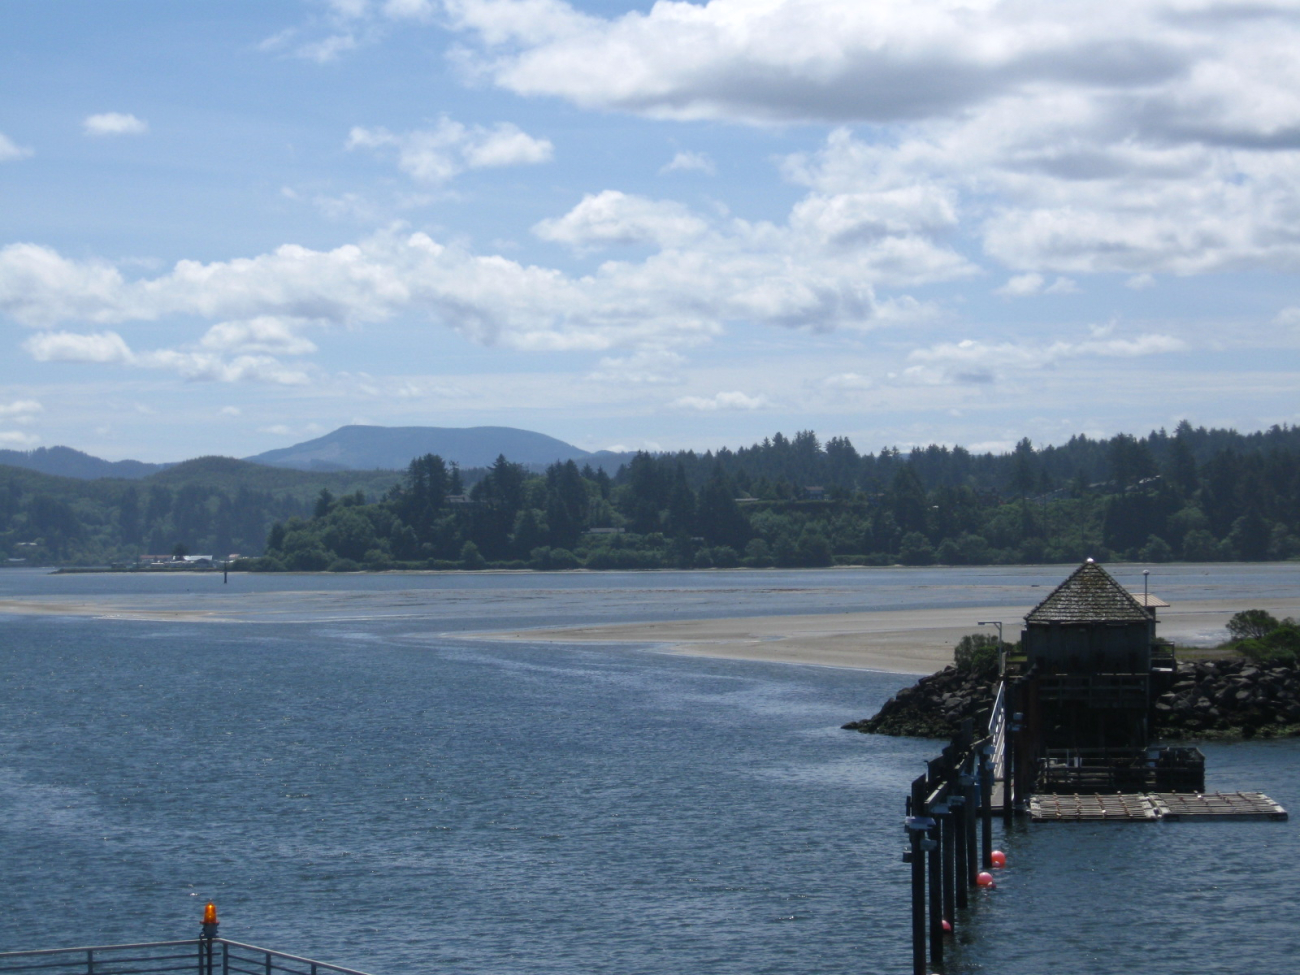 A view towards the east end of Yaquina Bay